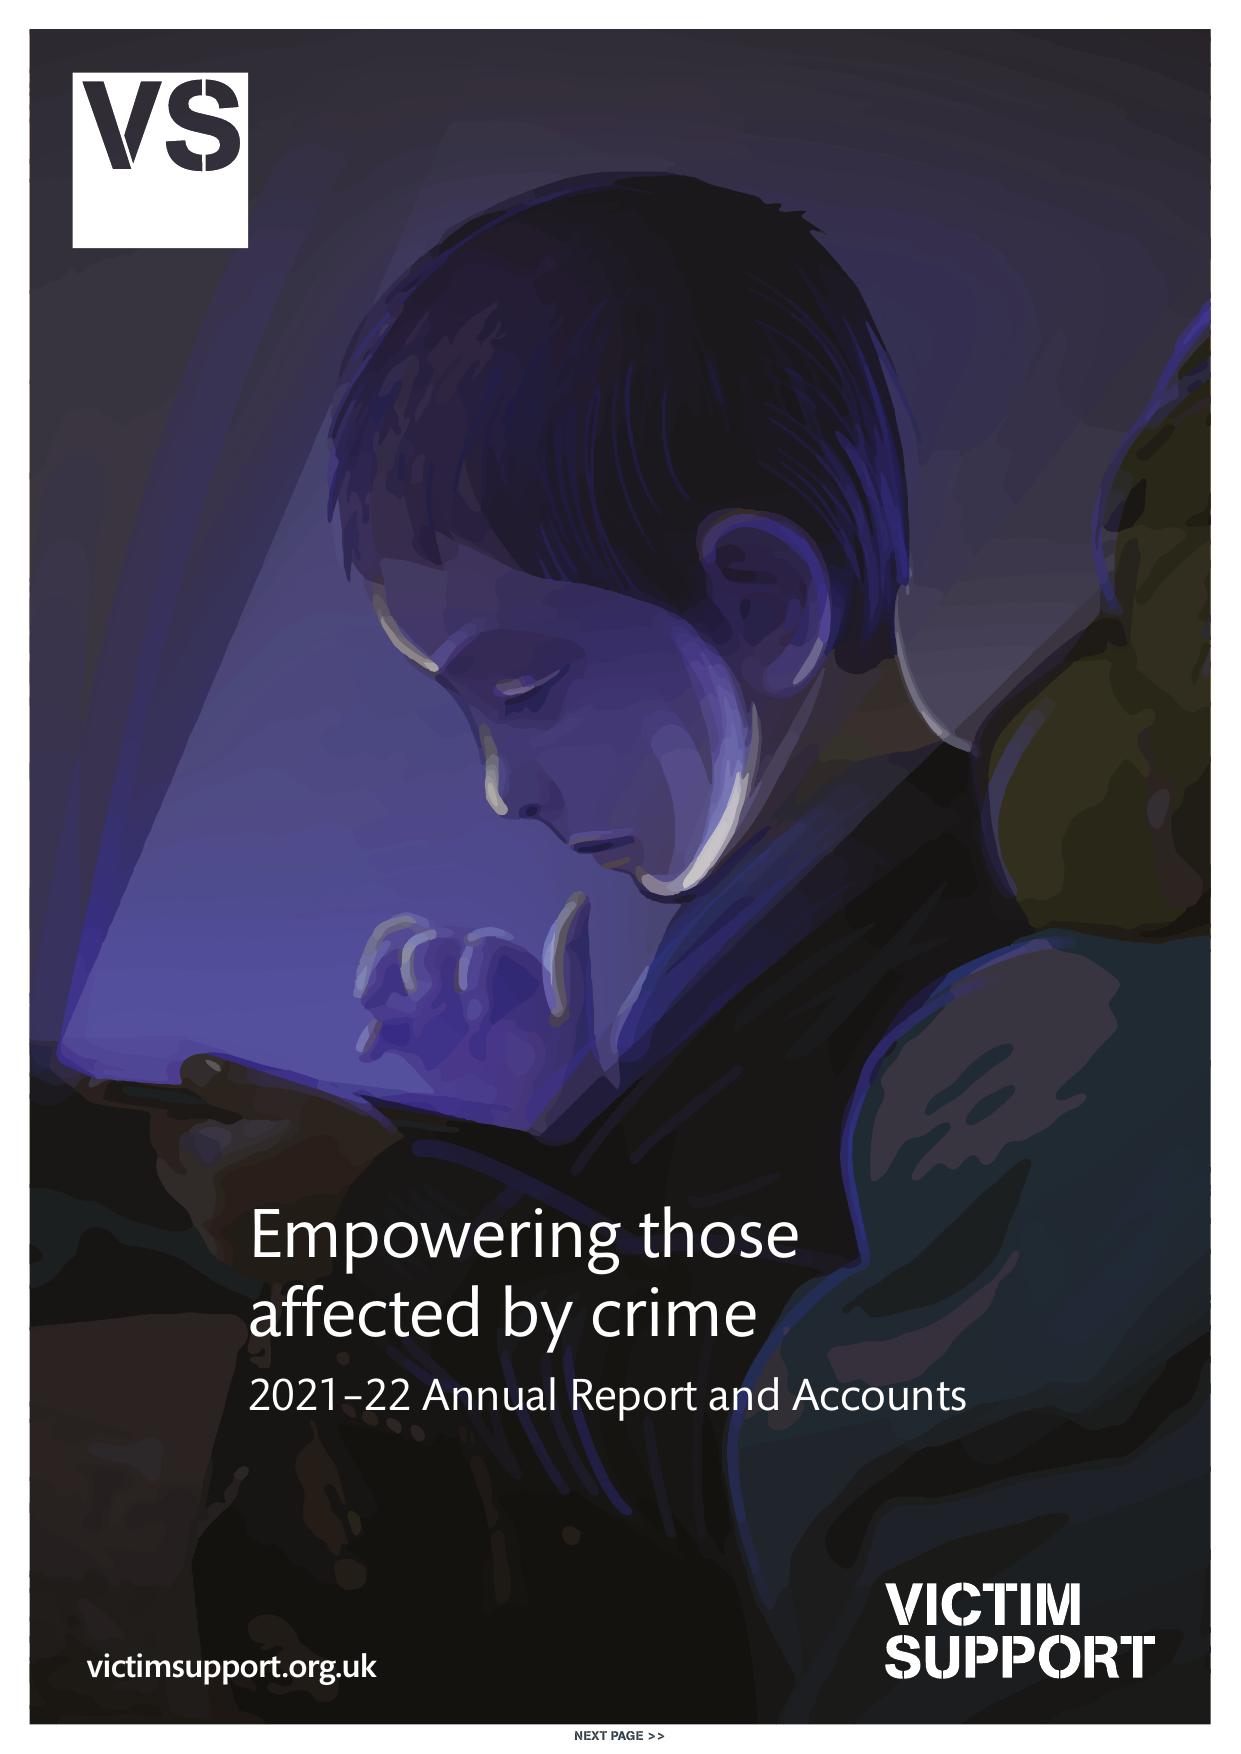 VICTIMSUPPORT.ORG.UK 2022 Annual Report